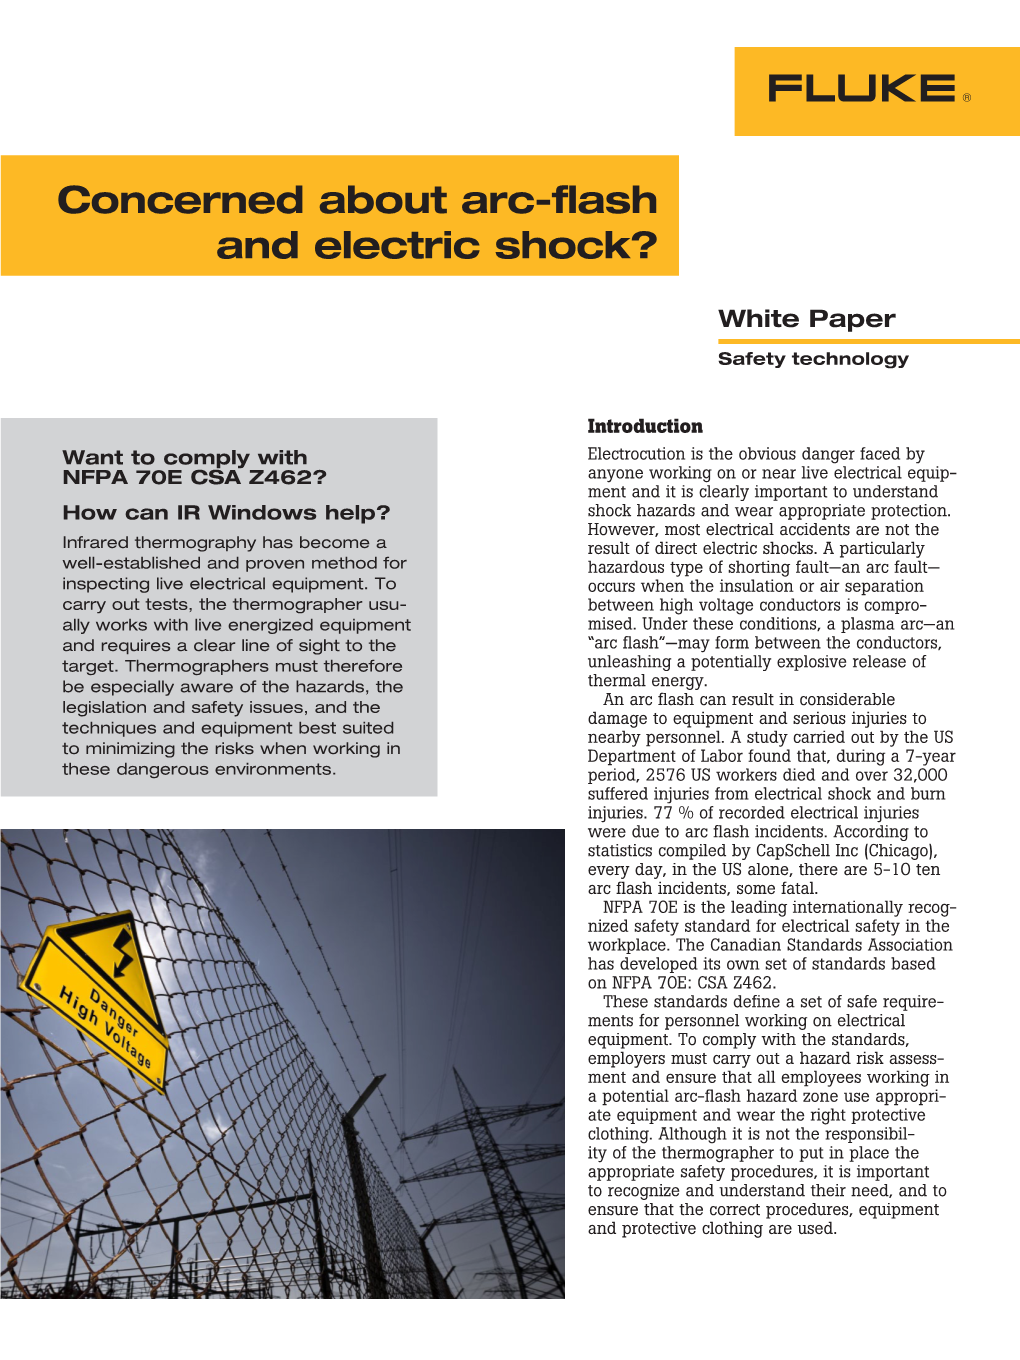 Concerned About Arc-Flash and Electric Shock?